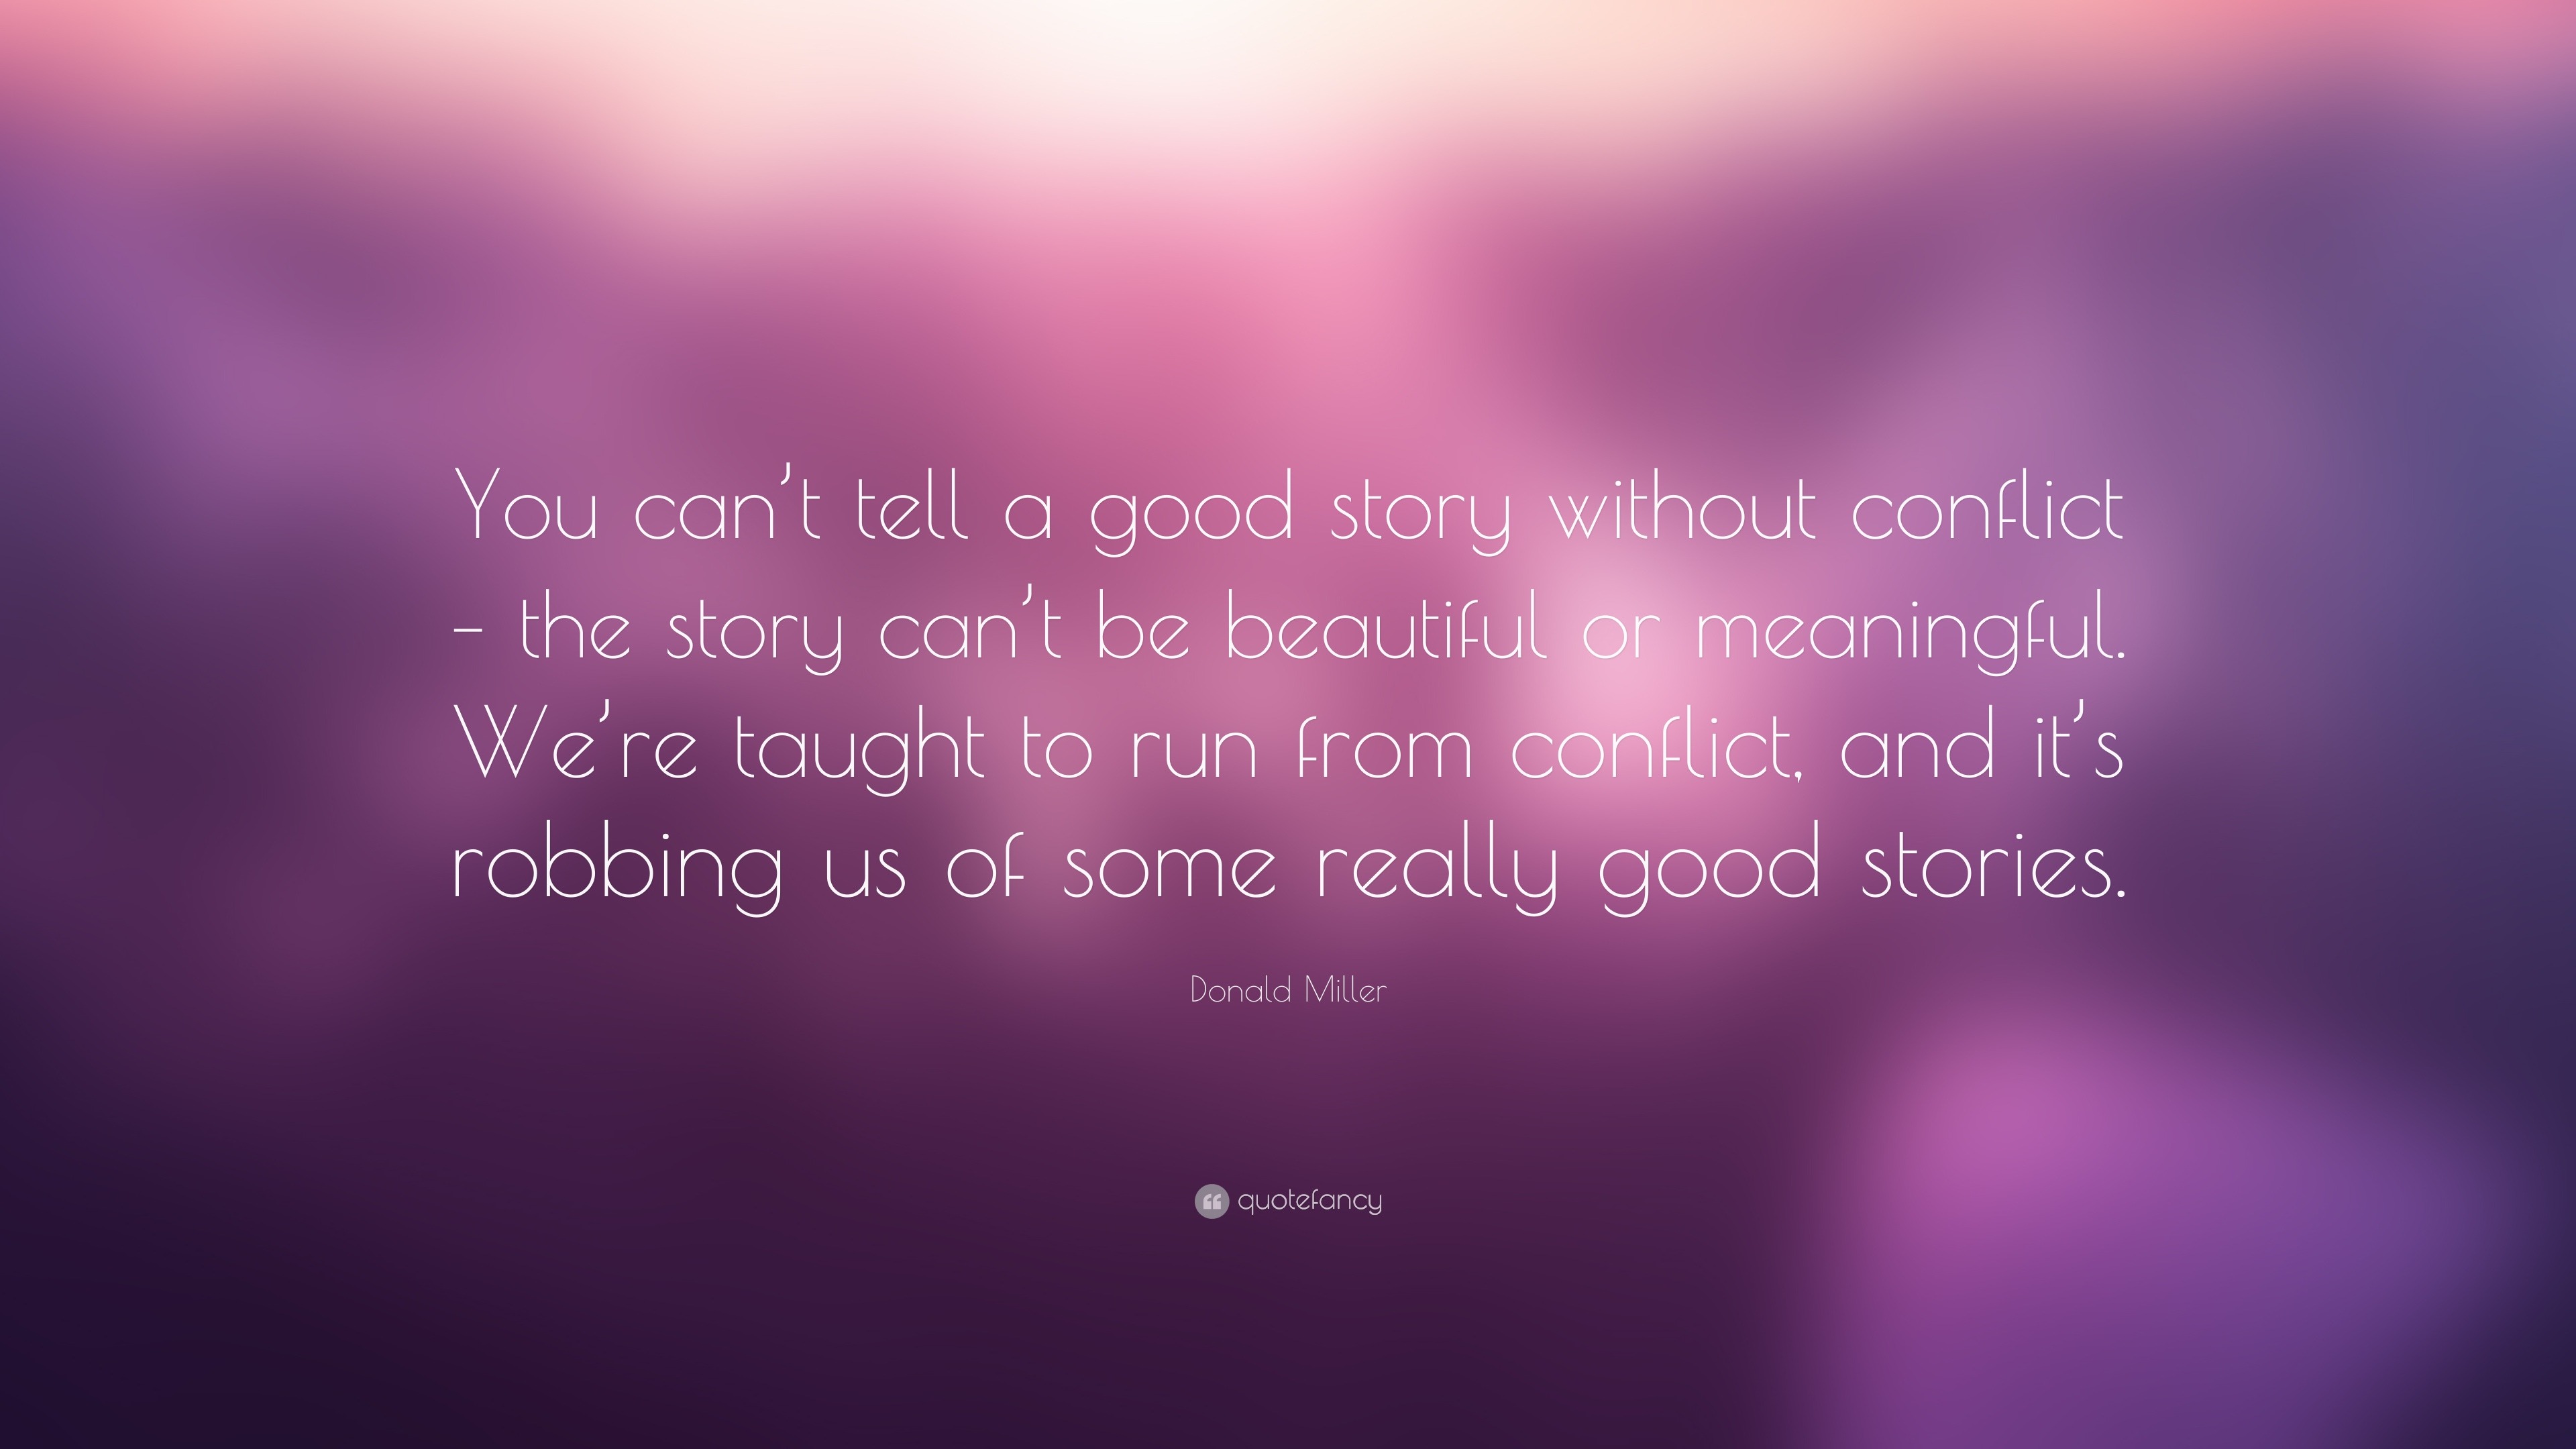 Donald Miller Quote: “You can’t tell a good story without conflict ...